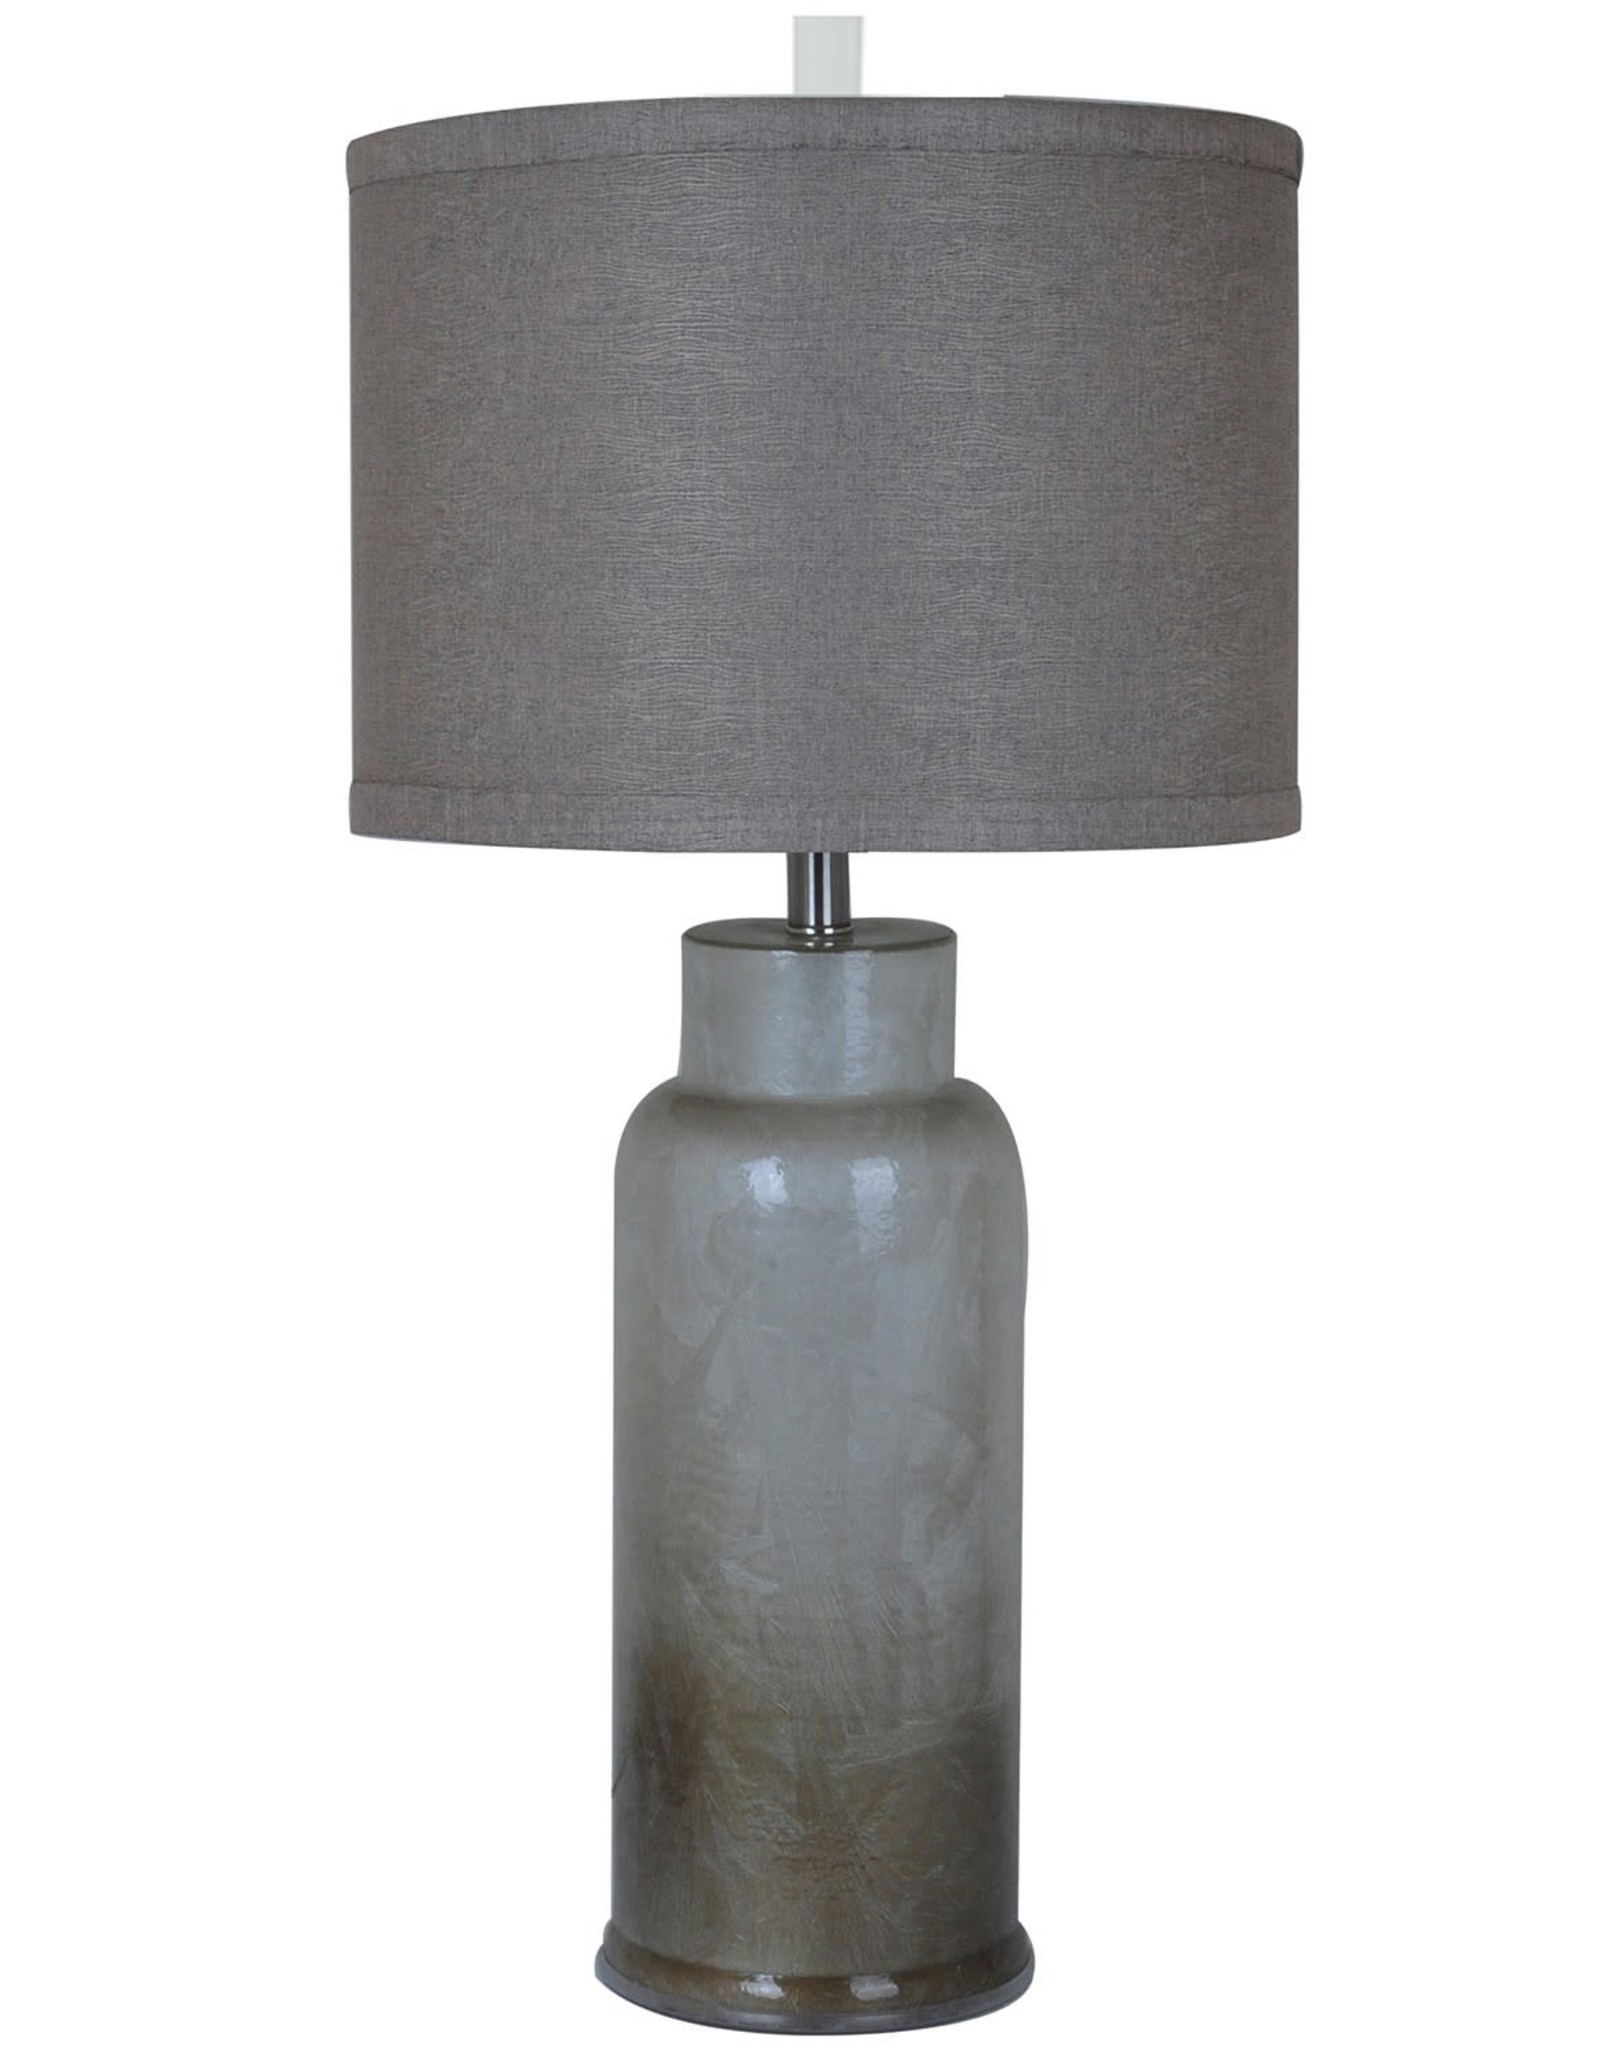 Crestview Rossi Brown/Gray Glass Table Lamp